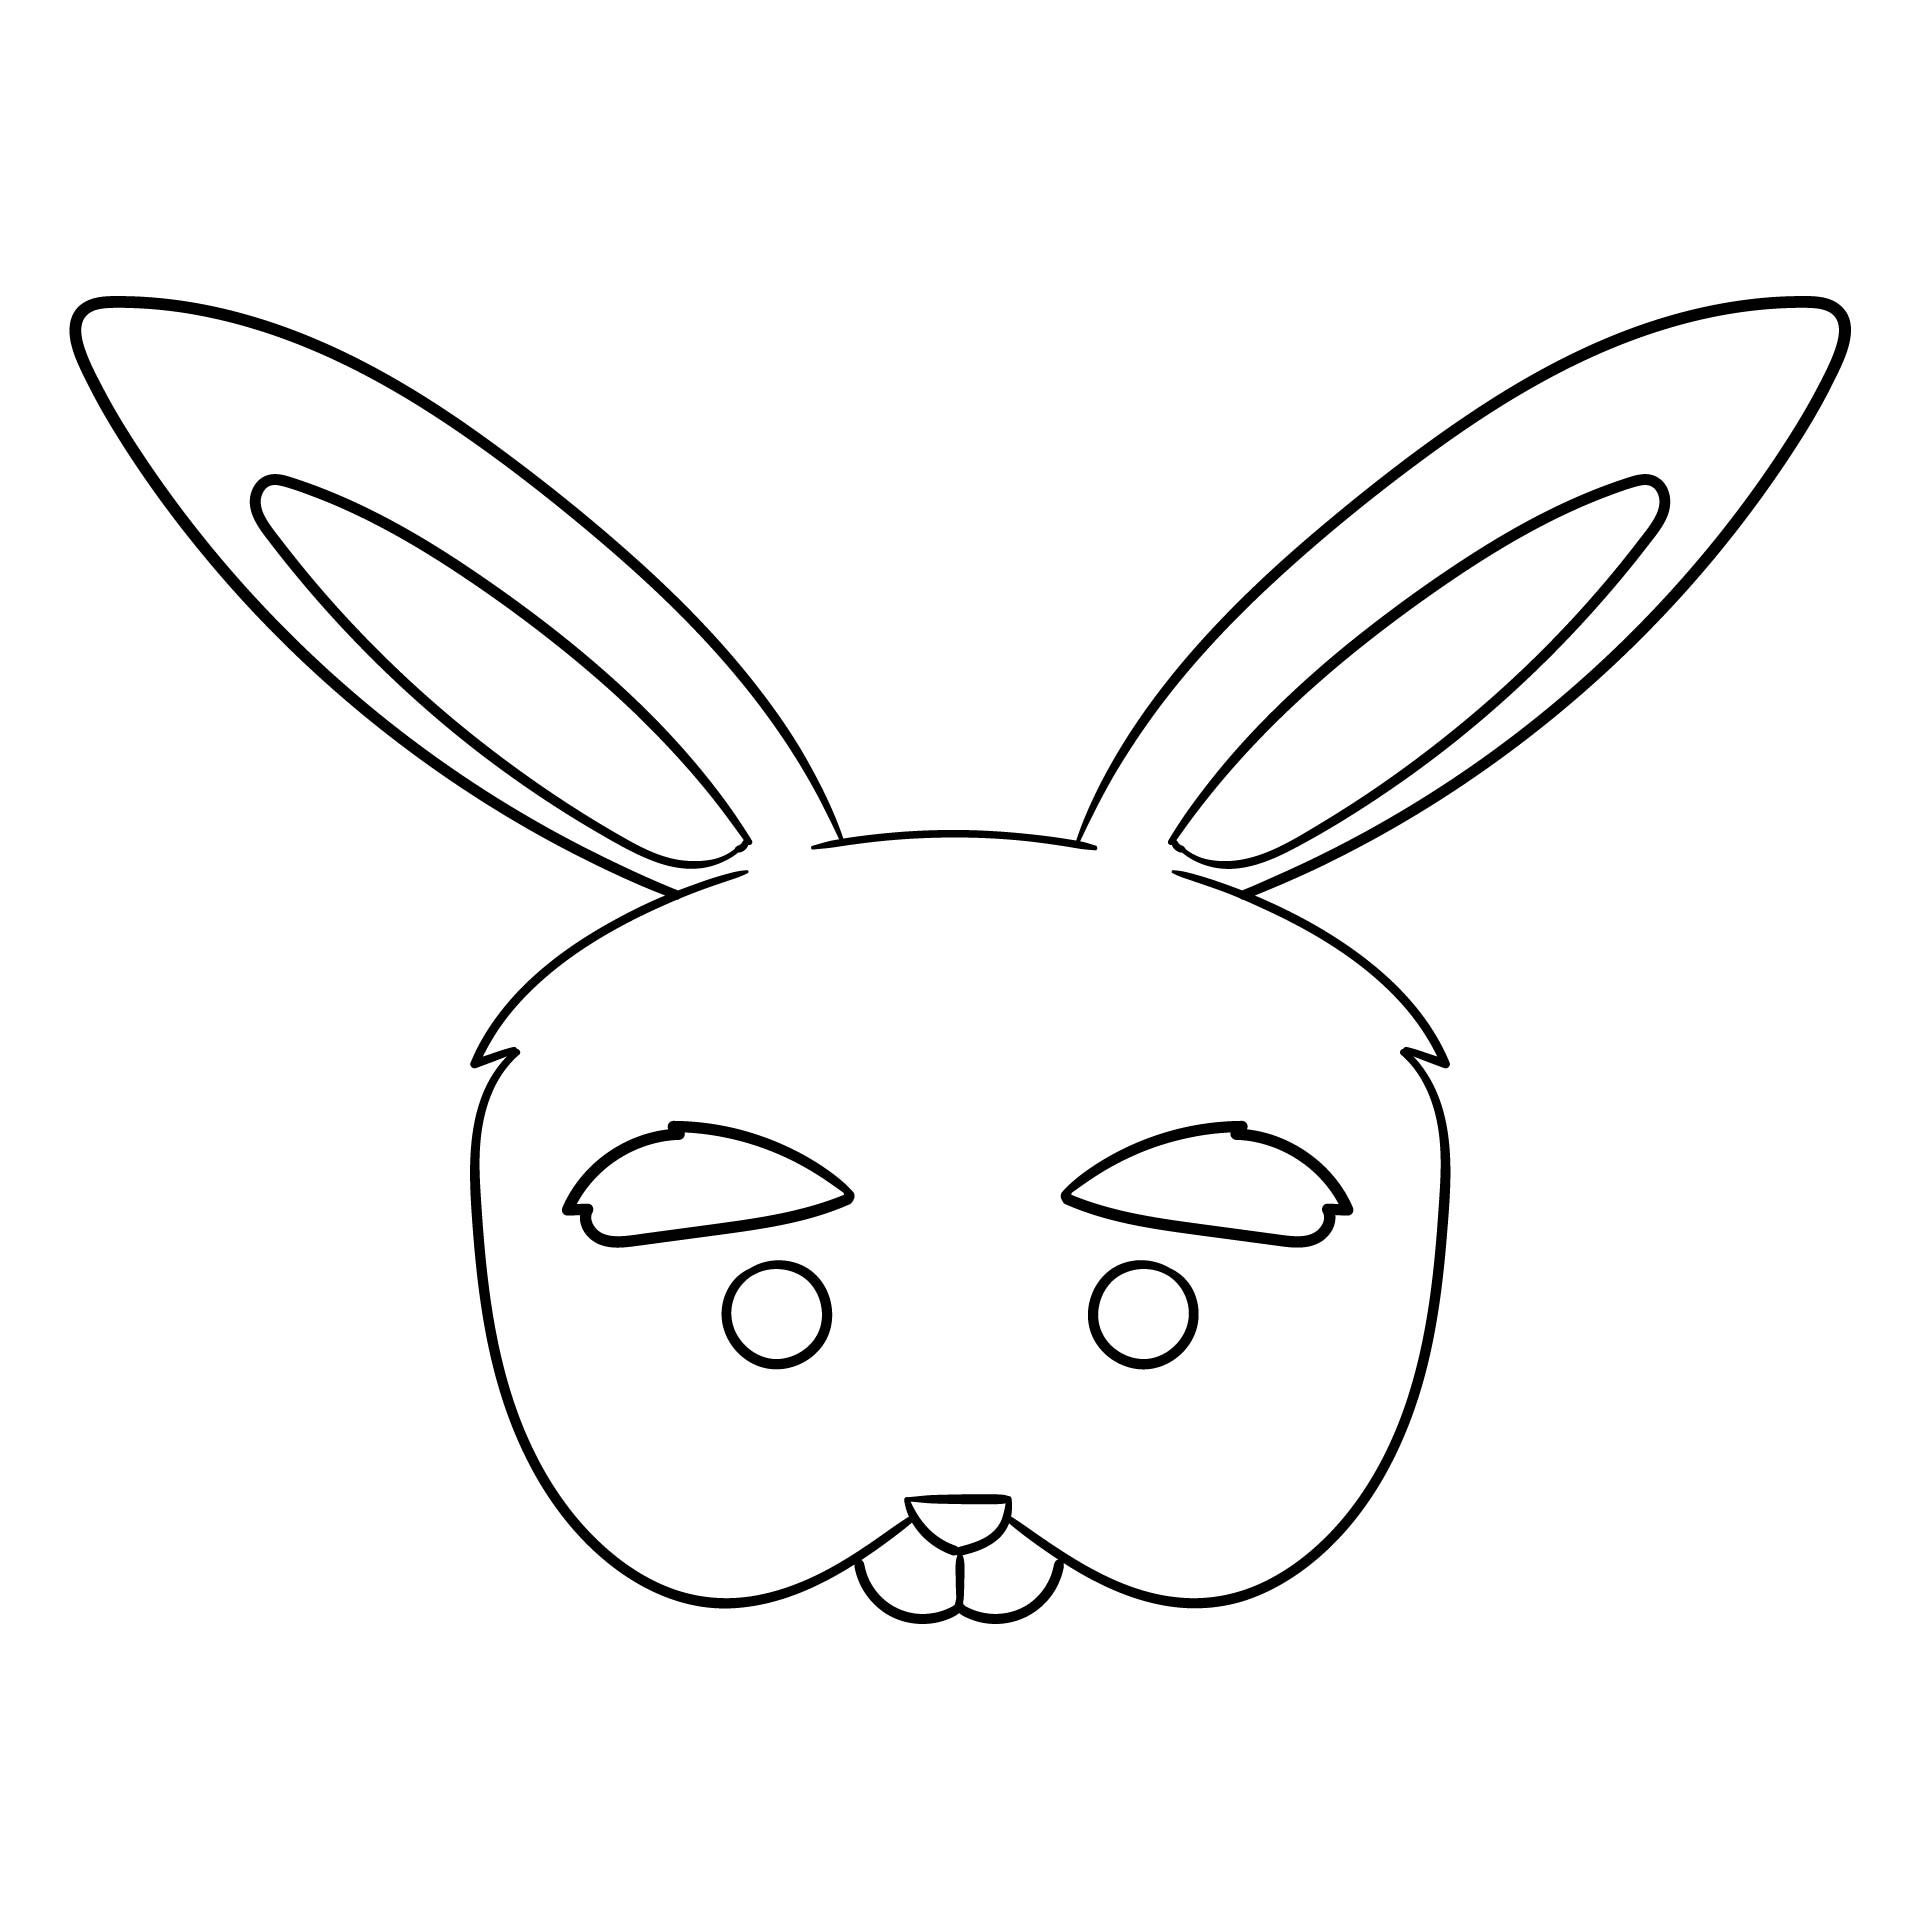 Rabbit Mask Coloring Pages